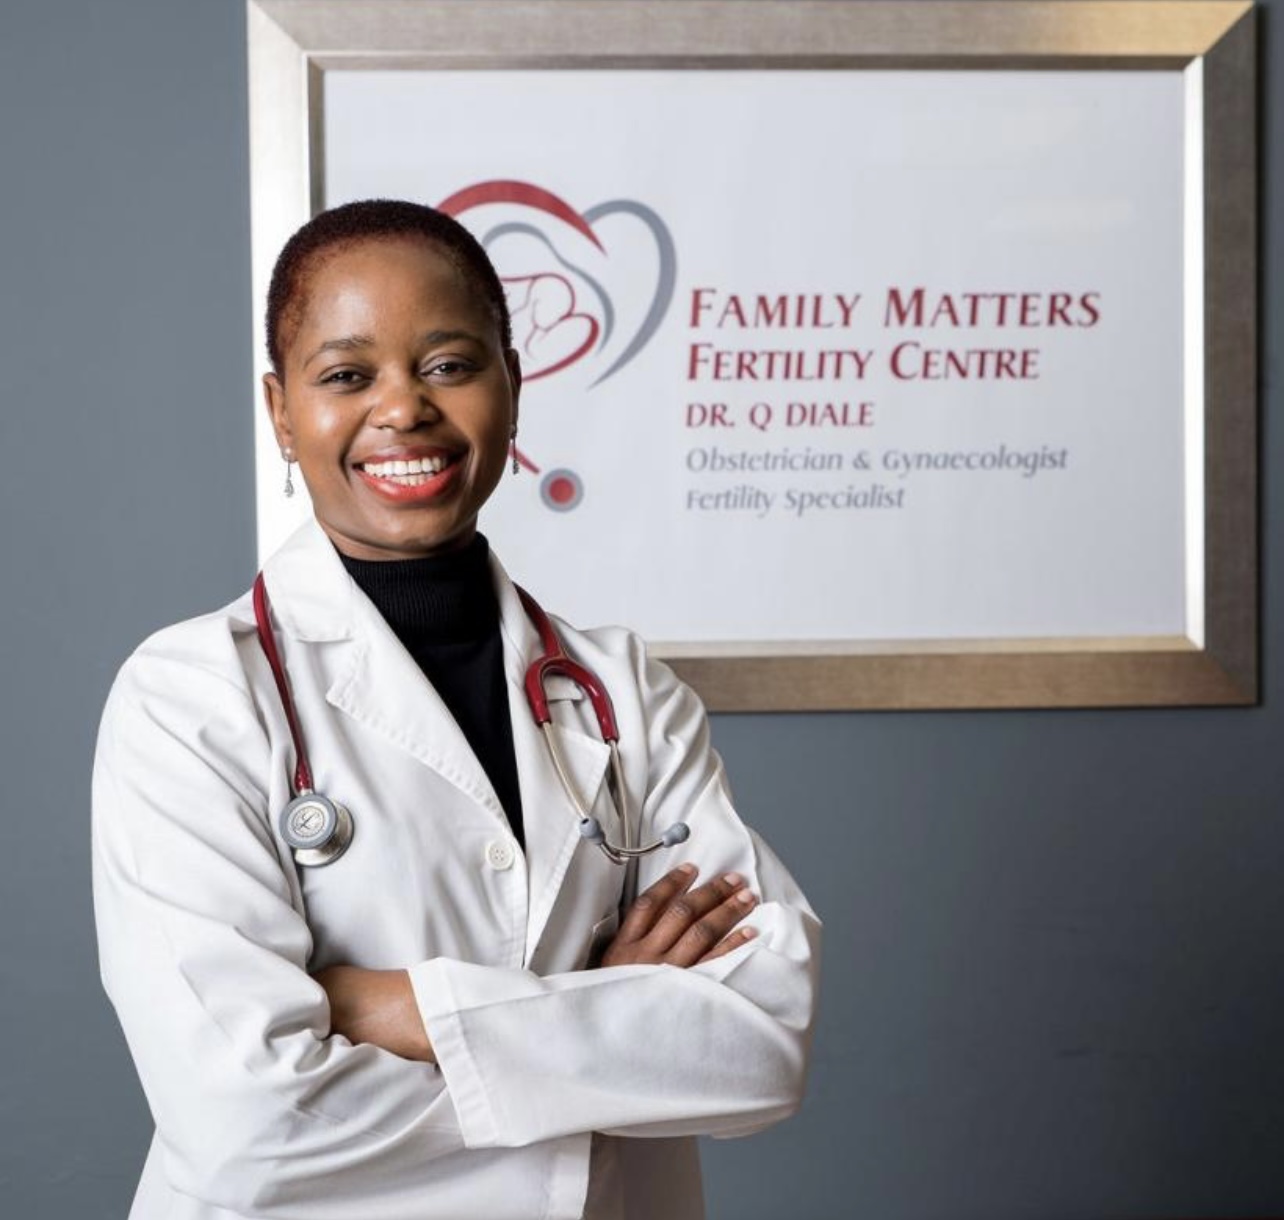 Meet – Dr. Qinisile Diale, South African born Gynaecologist, Obstetrician and Fertility Specialist.